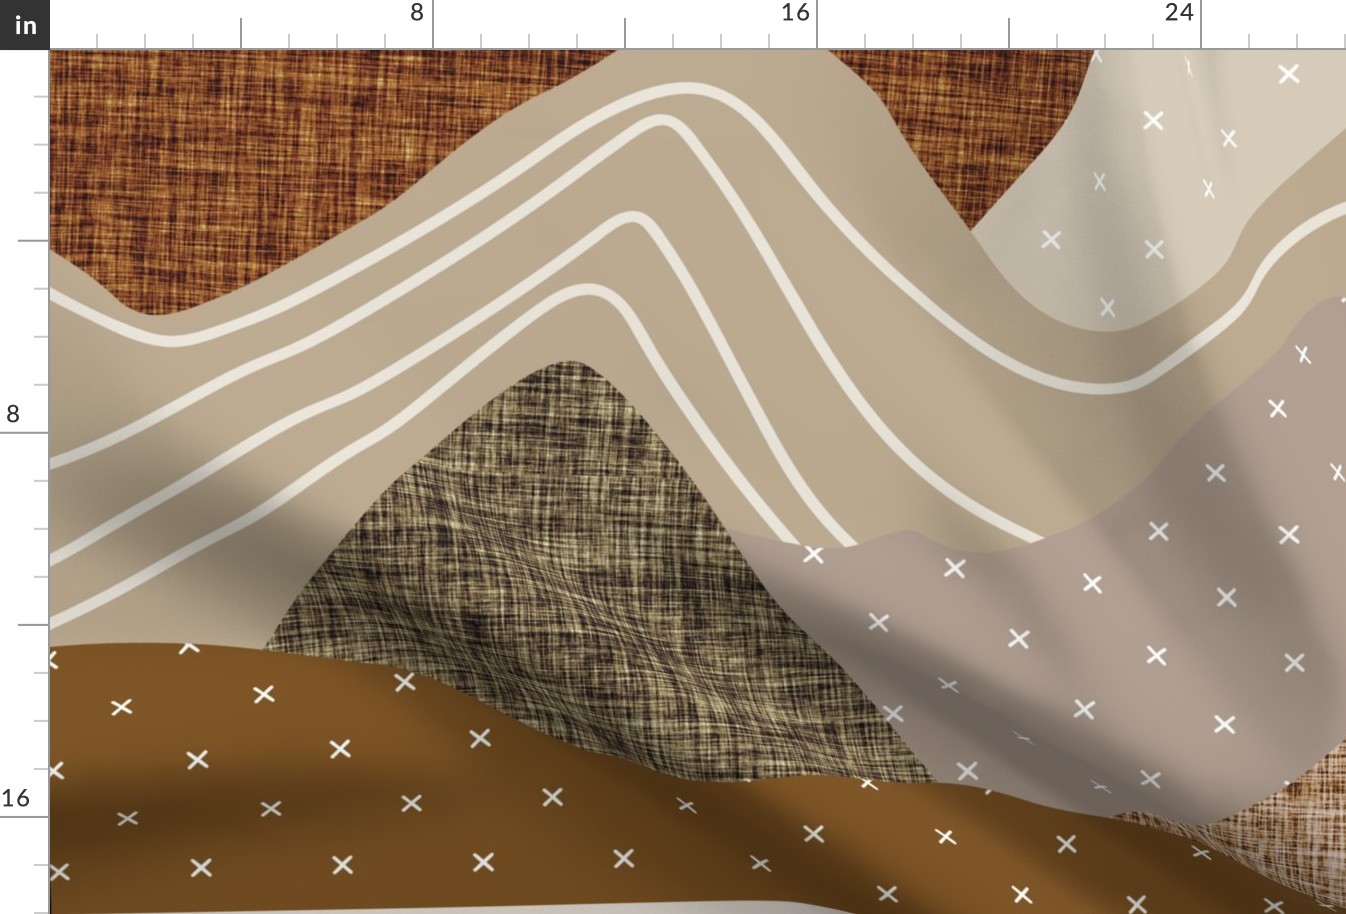 1 blanket + 2 loveys: copper and taupe layered mountains